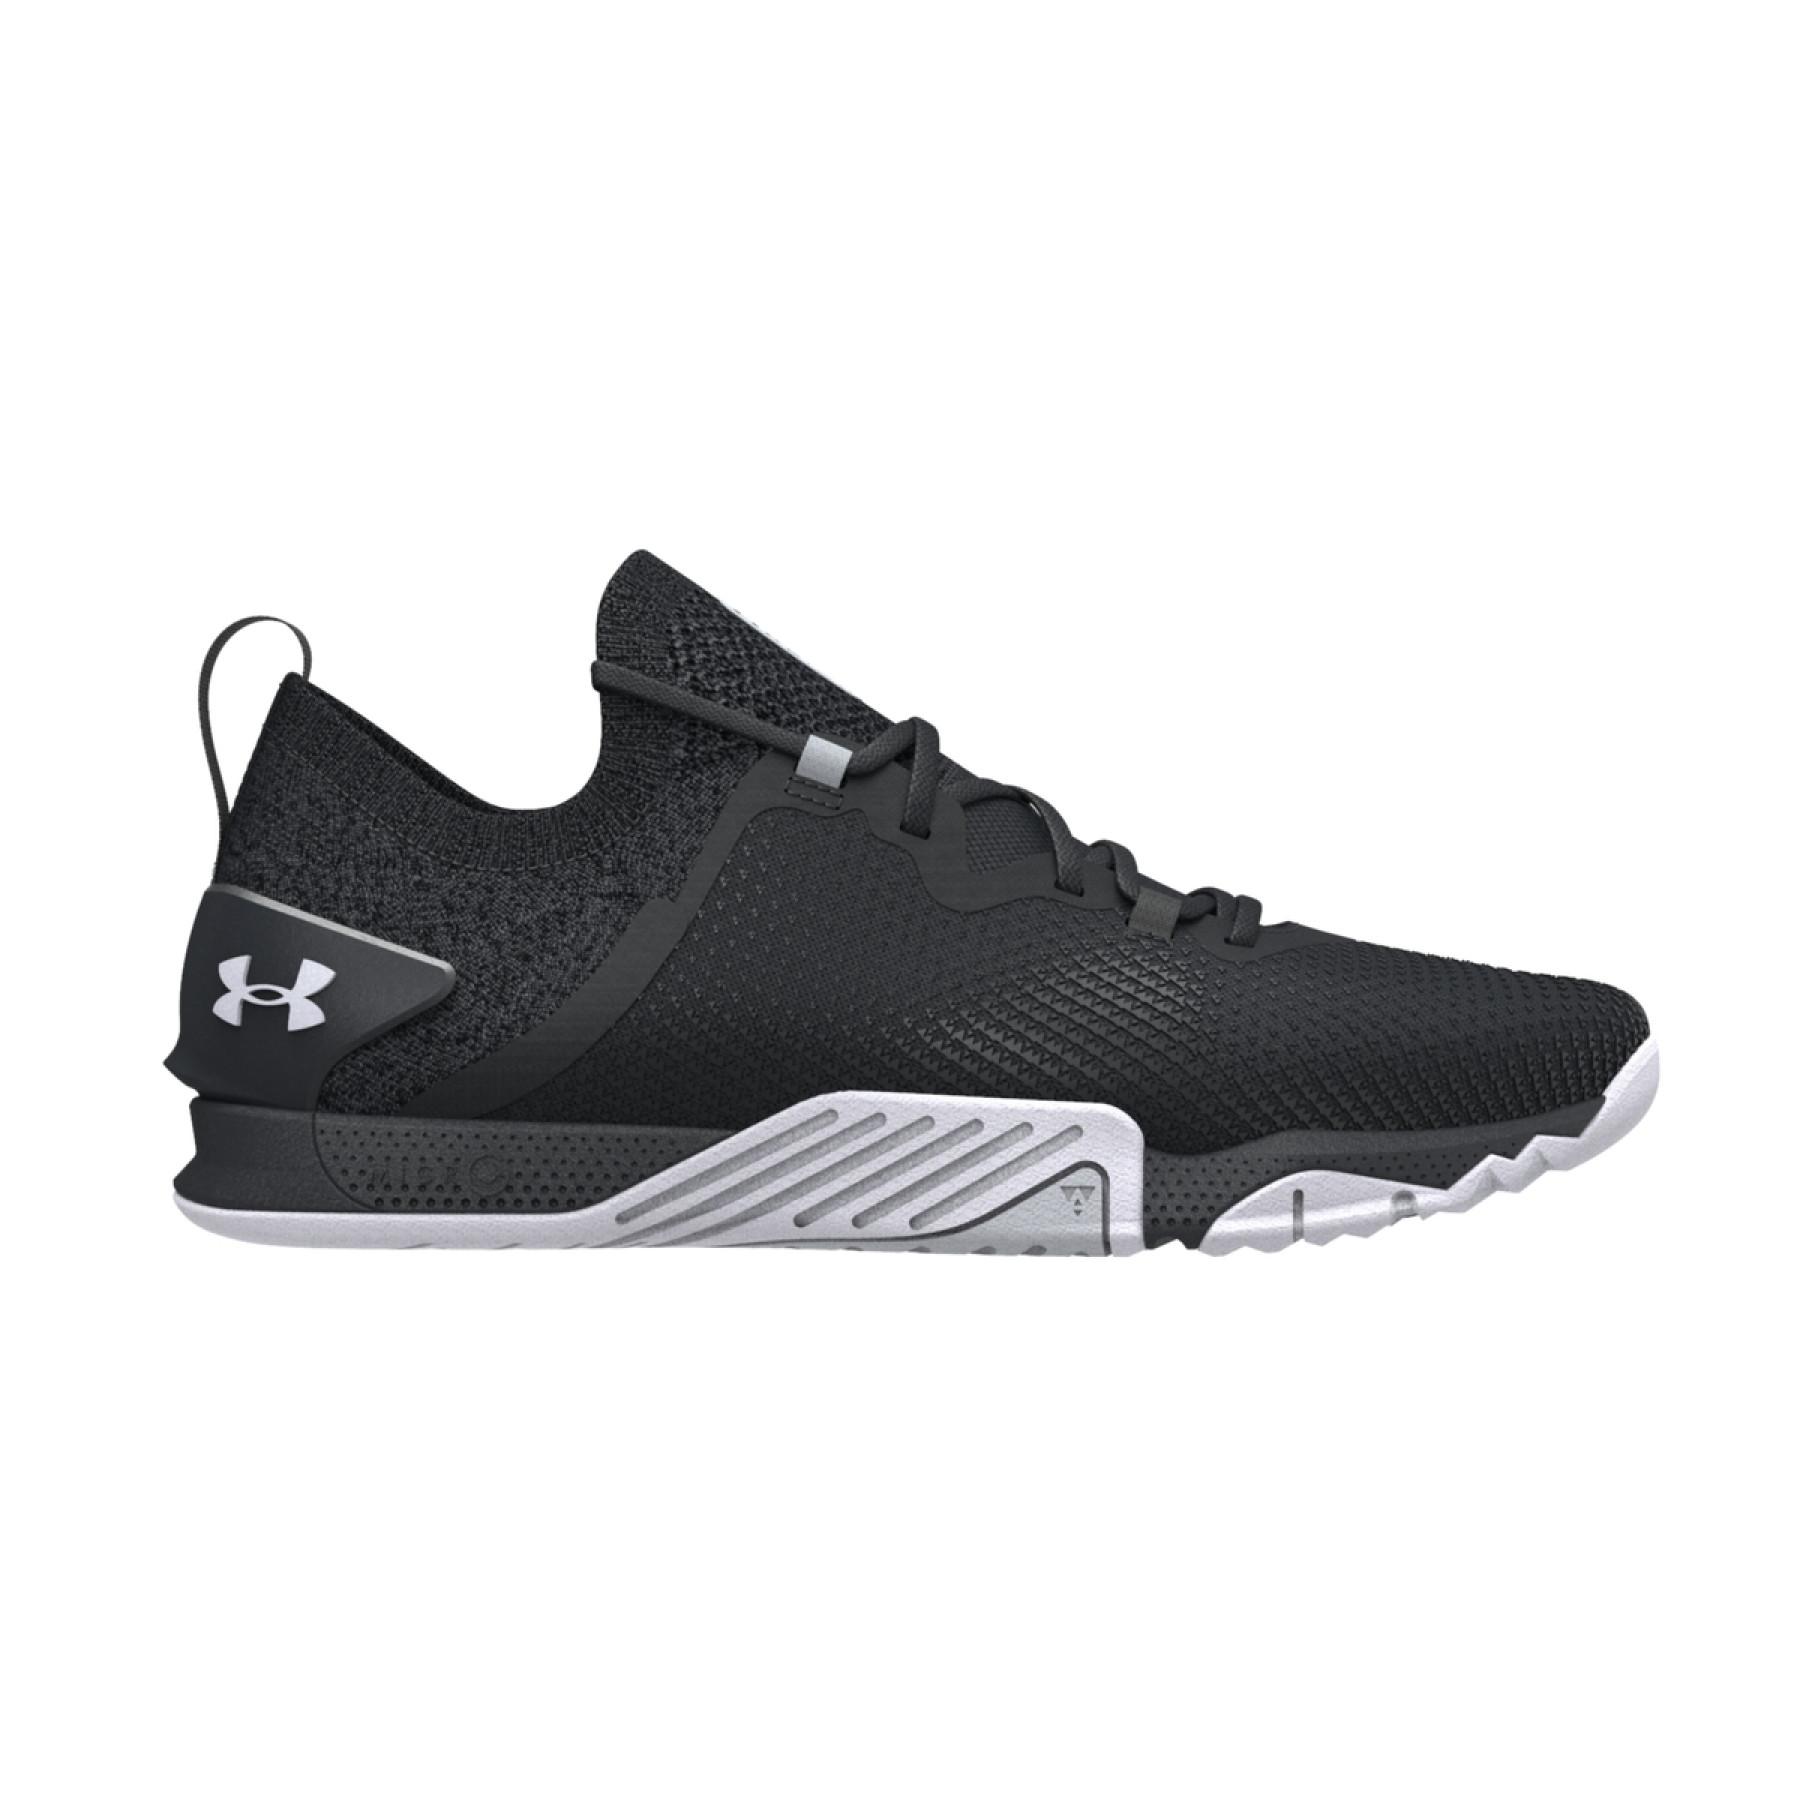 Women's training shoes Under Armour TriBase Reign 3